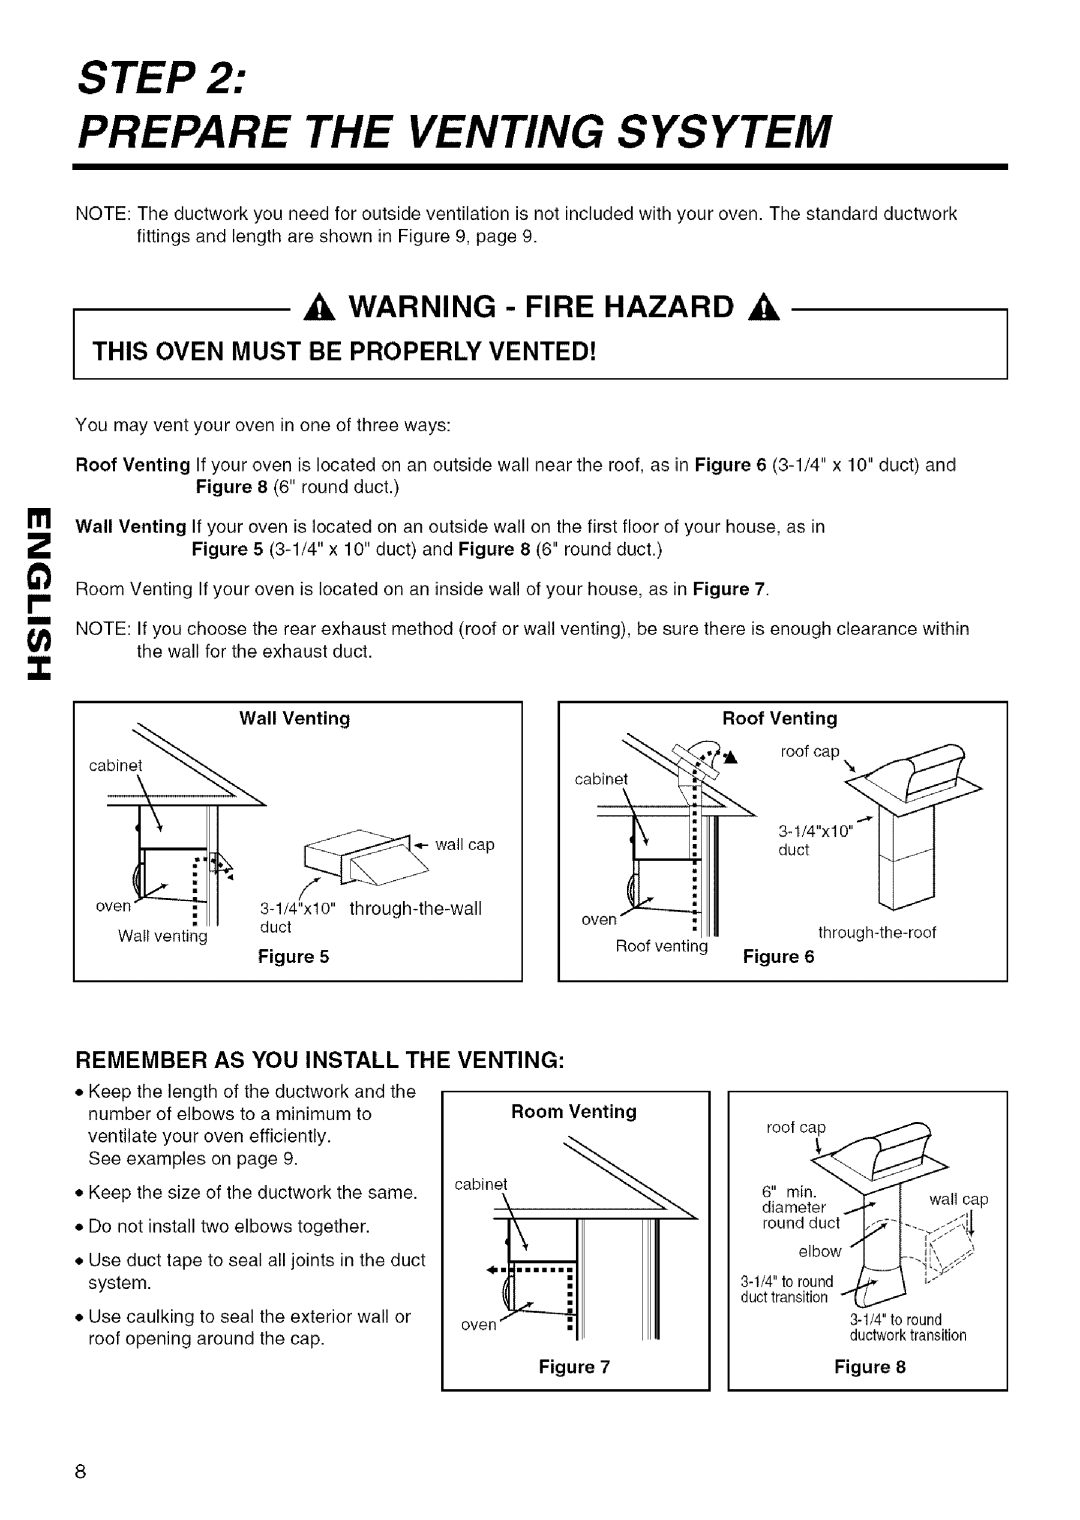 Kenmore 721.80524, 721.80404 Step Prepare The Venting S Ysytem, Warning - Fire Hazard, Remember As You Install The Venting 